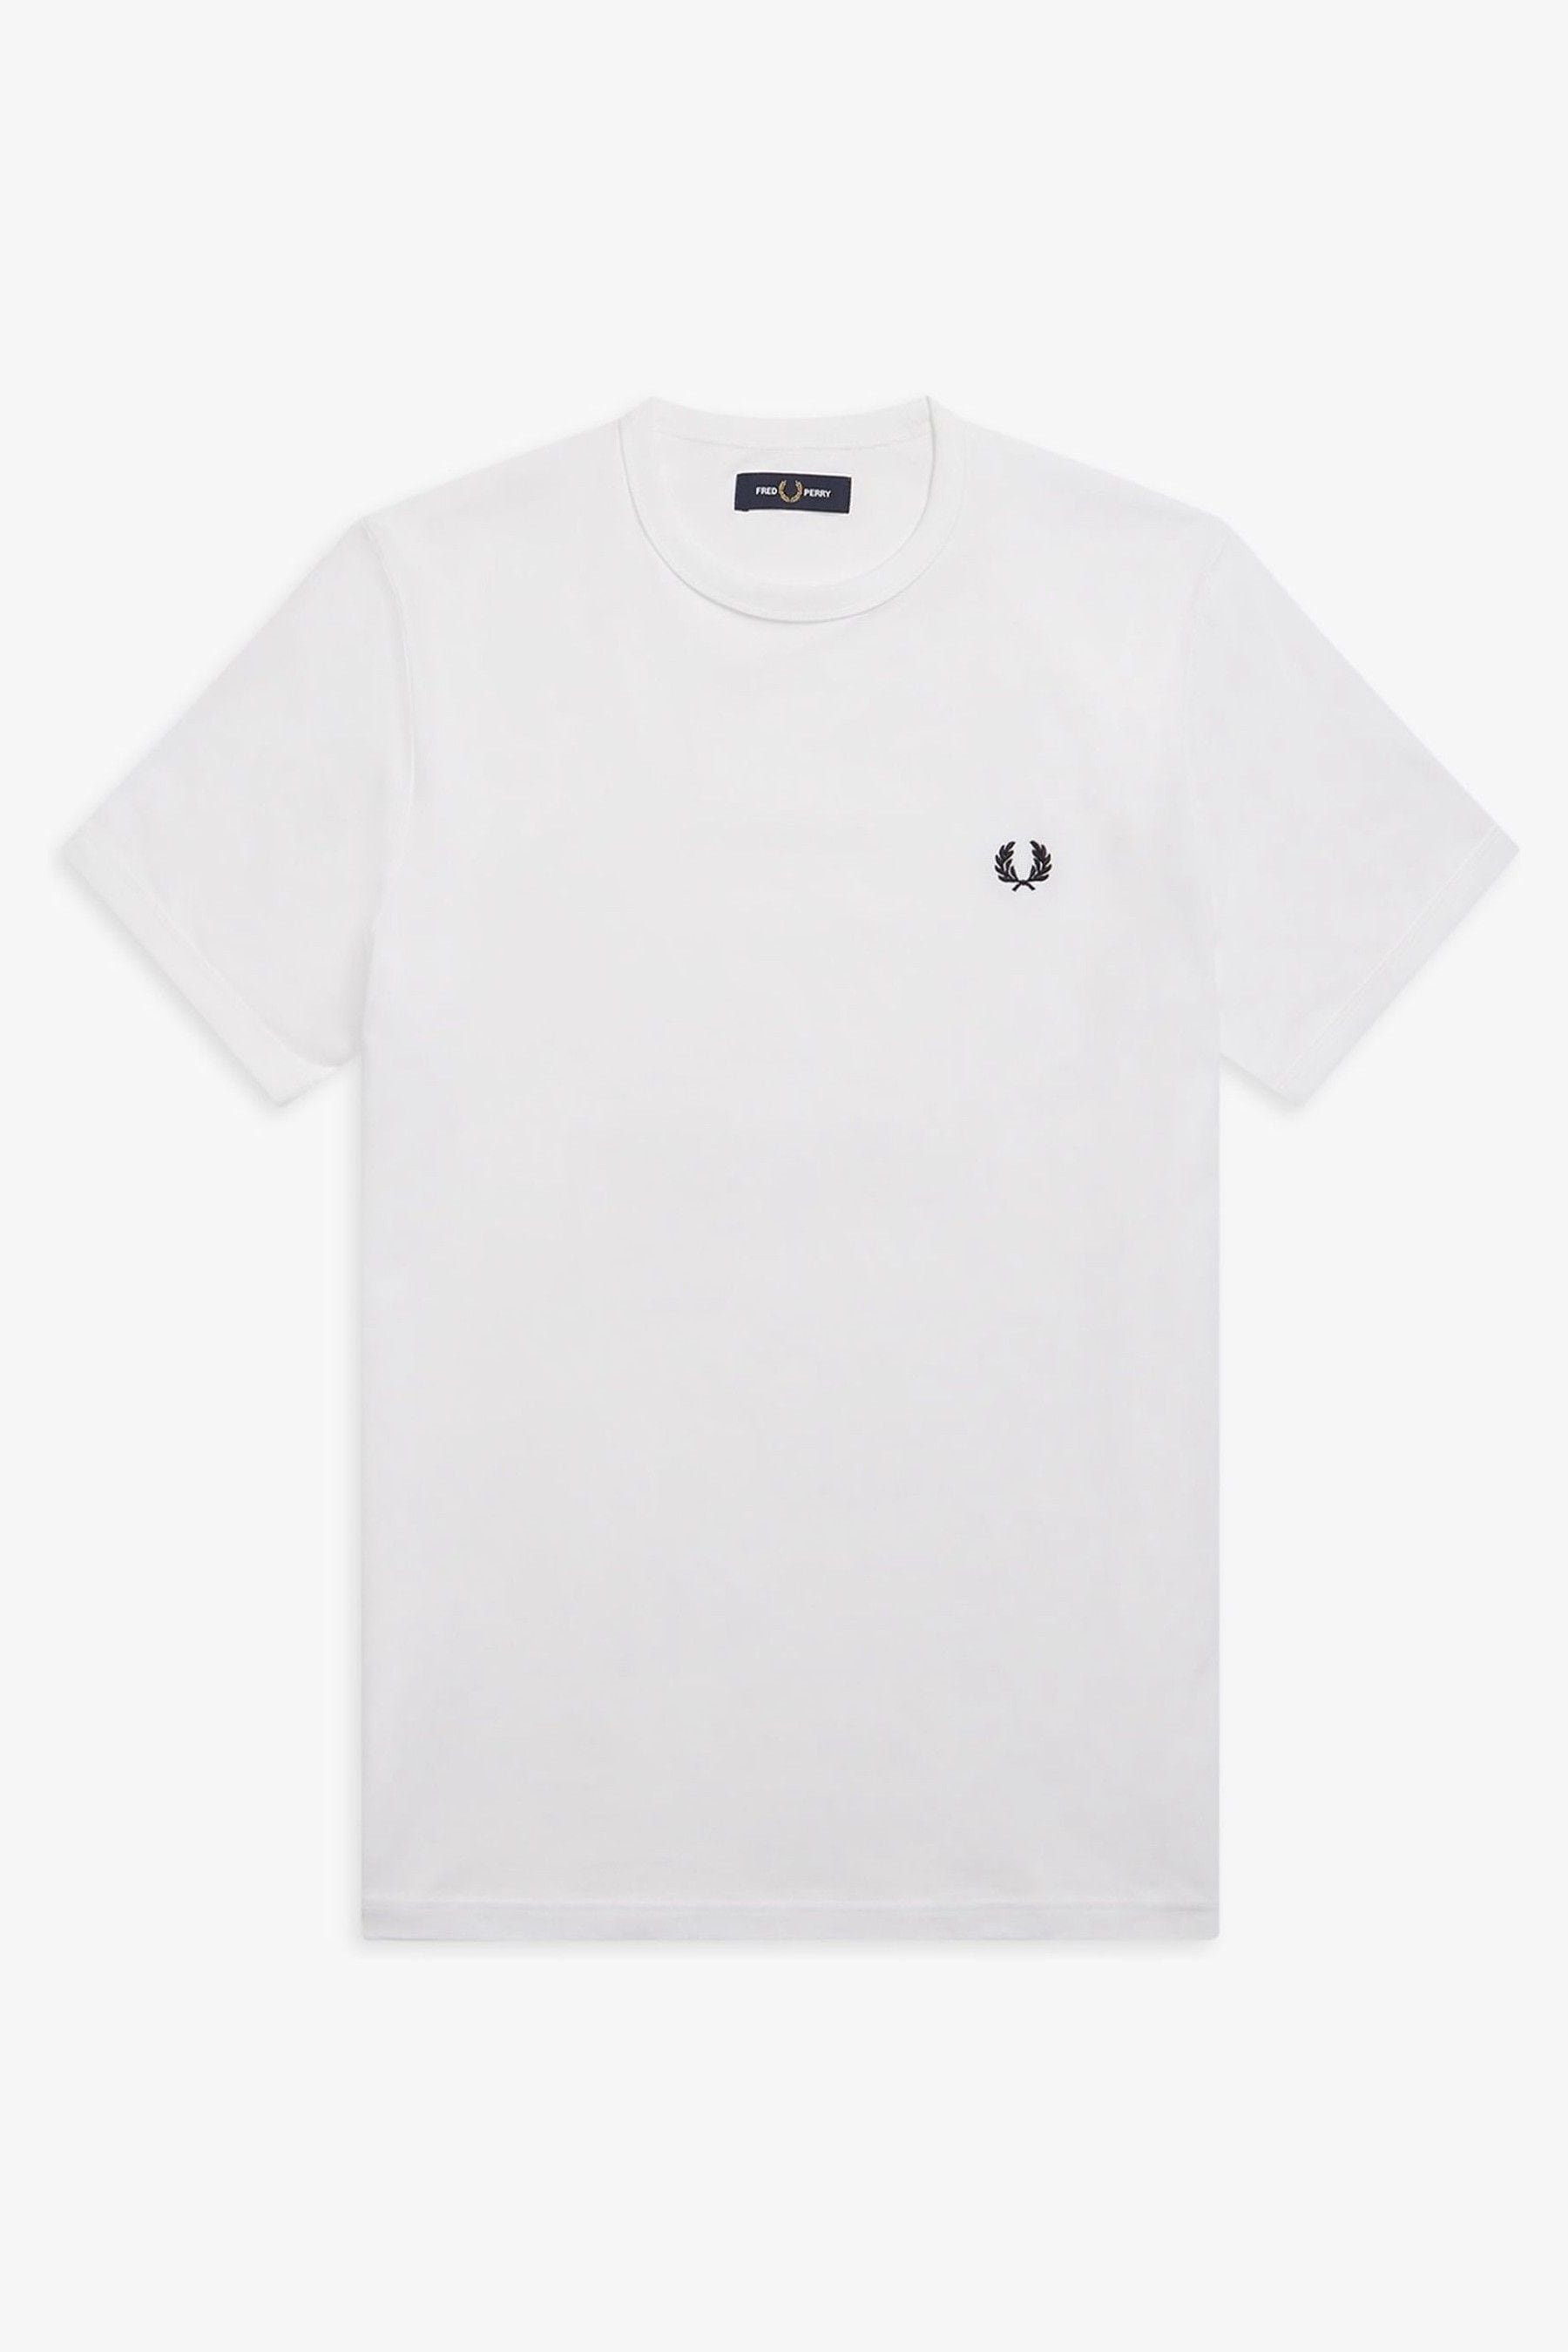 Buy Fred Perry T-Shirt from the Next UK online shop